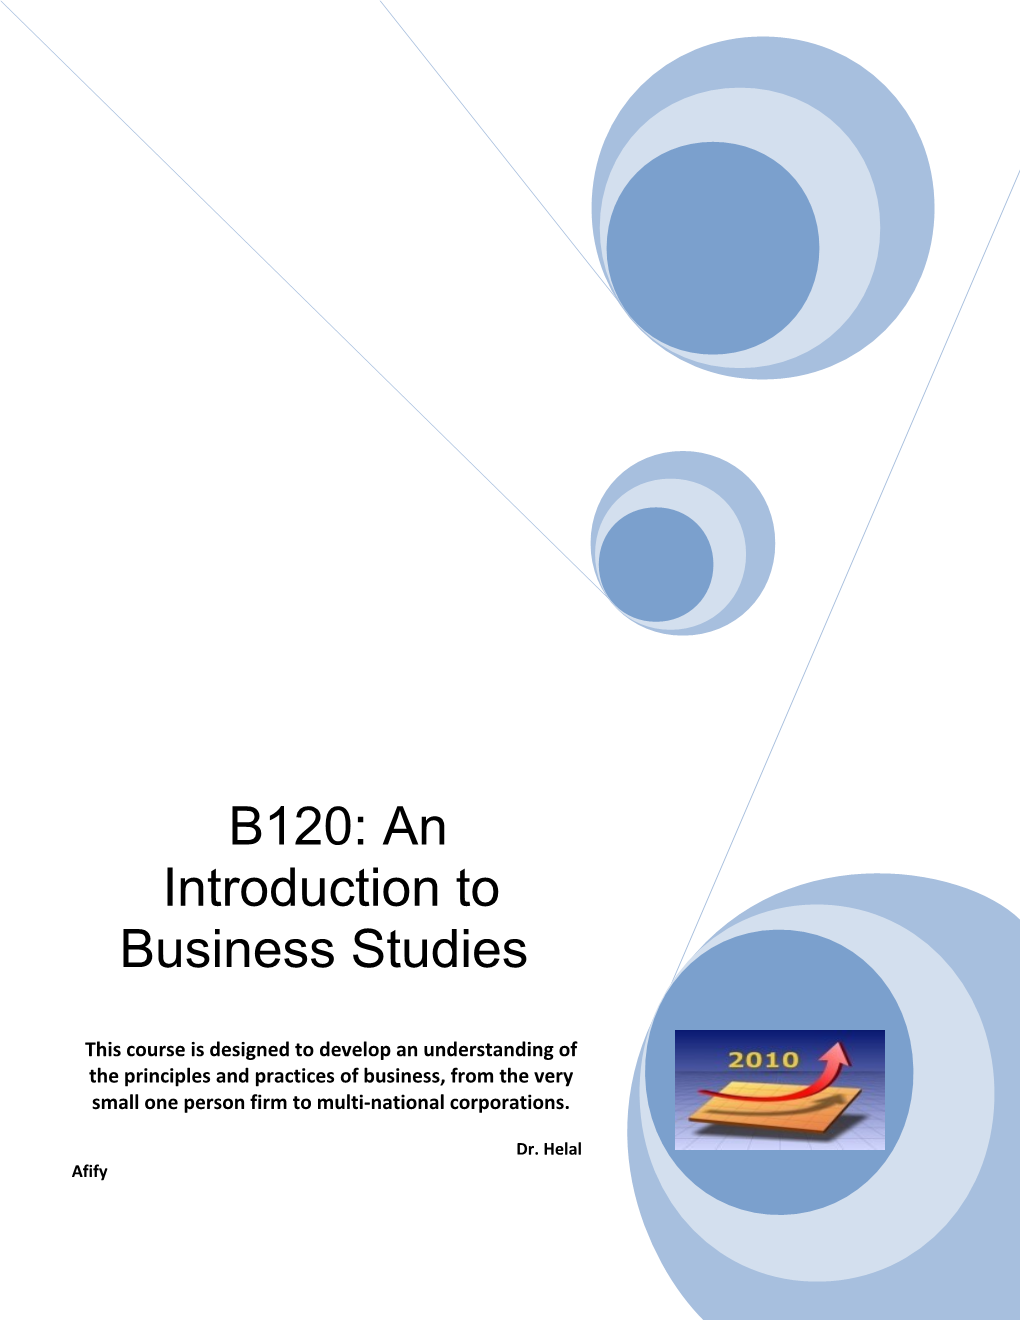 B120: an Introduction to Business Studies